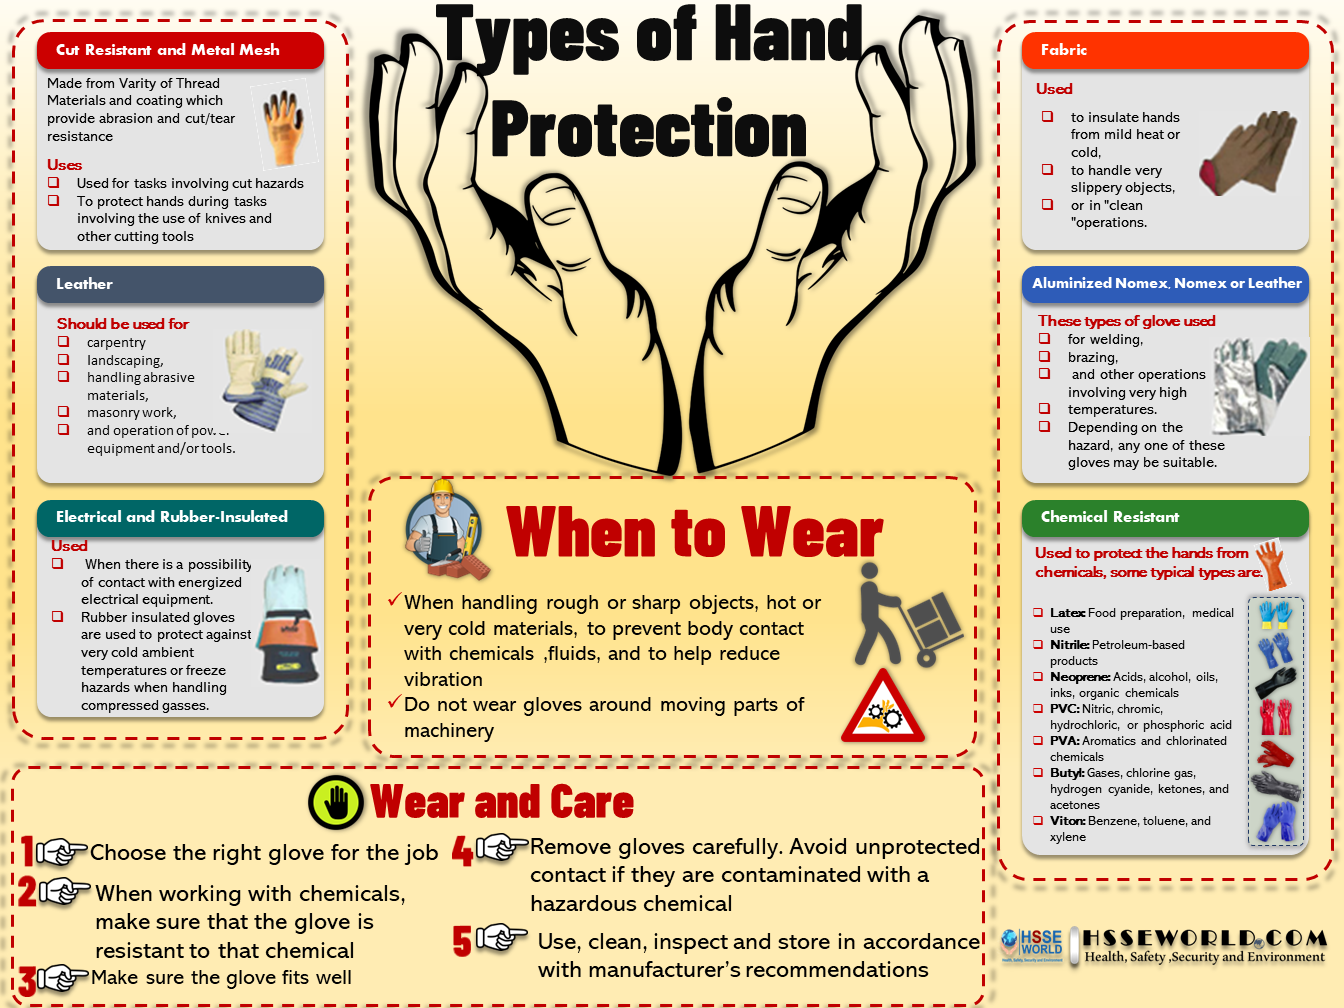 How to Determine Which Cut-resistant Glove Rating is OSHA